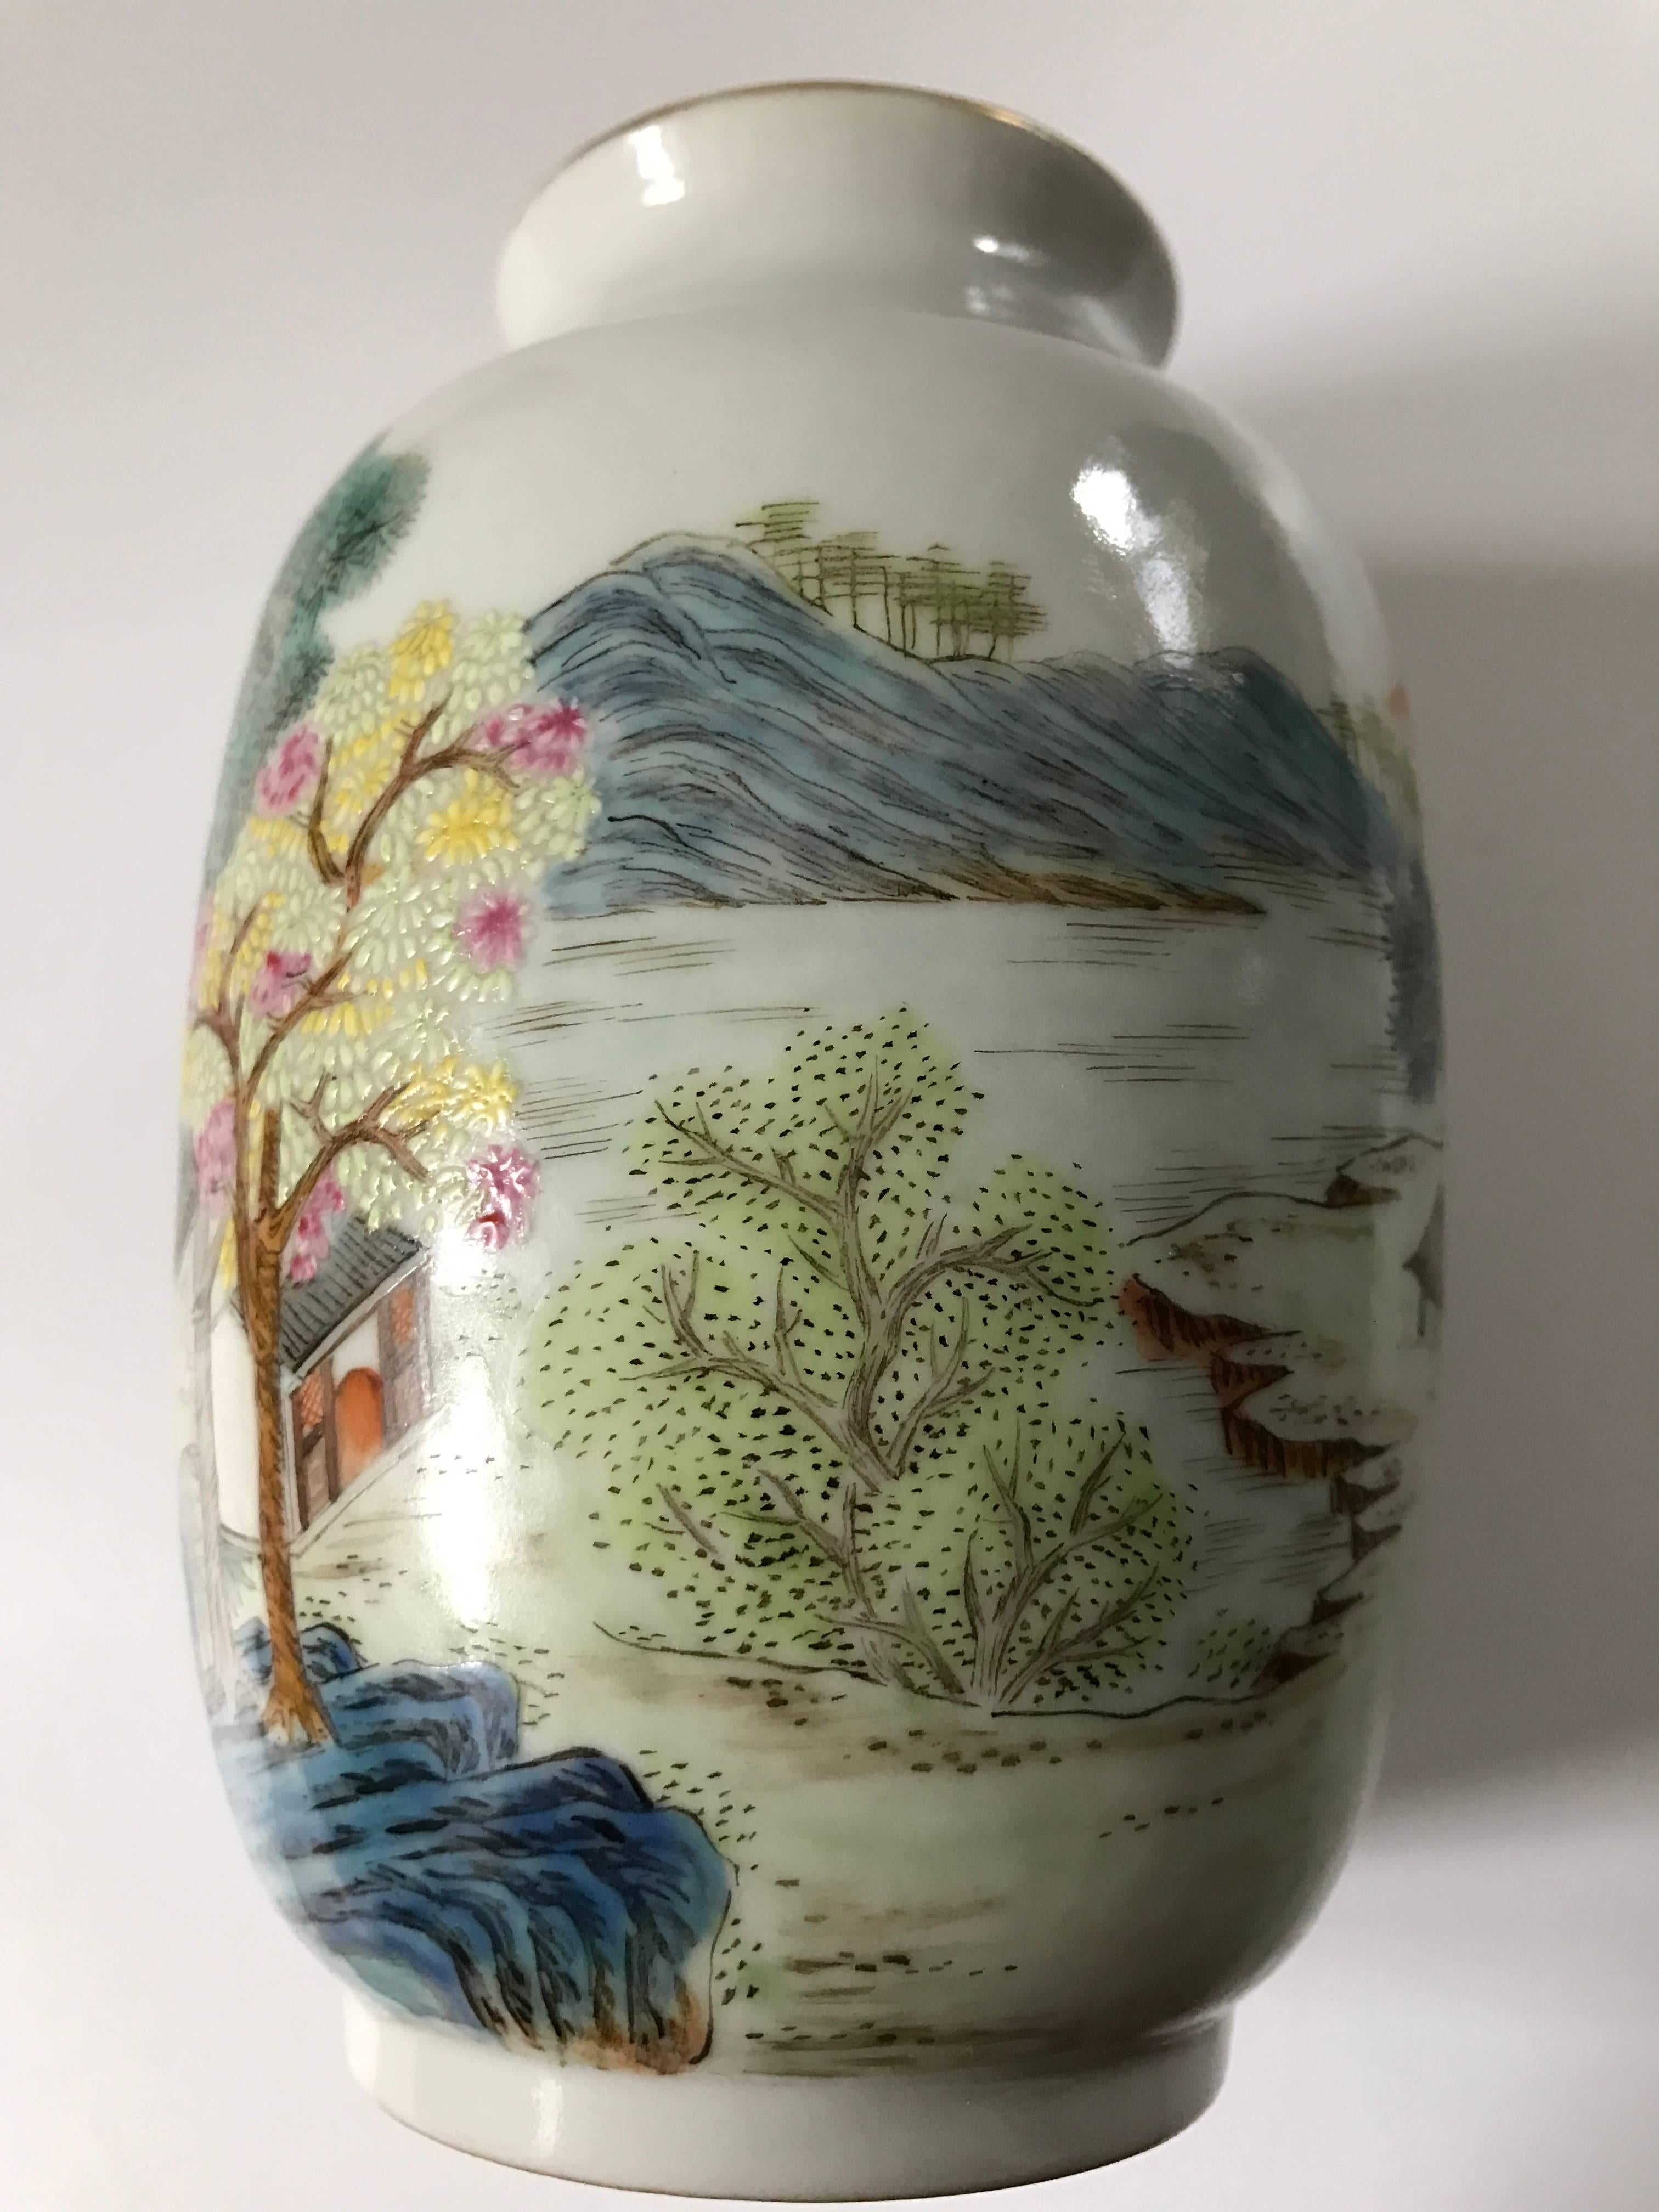 This vase is made during the Republic period during the first half of the 20th century and it is of such high quality, painted in the famille rose colors with incredible skill. The vase depicts mountains, houses, valleys and a landscape scene with